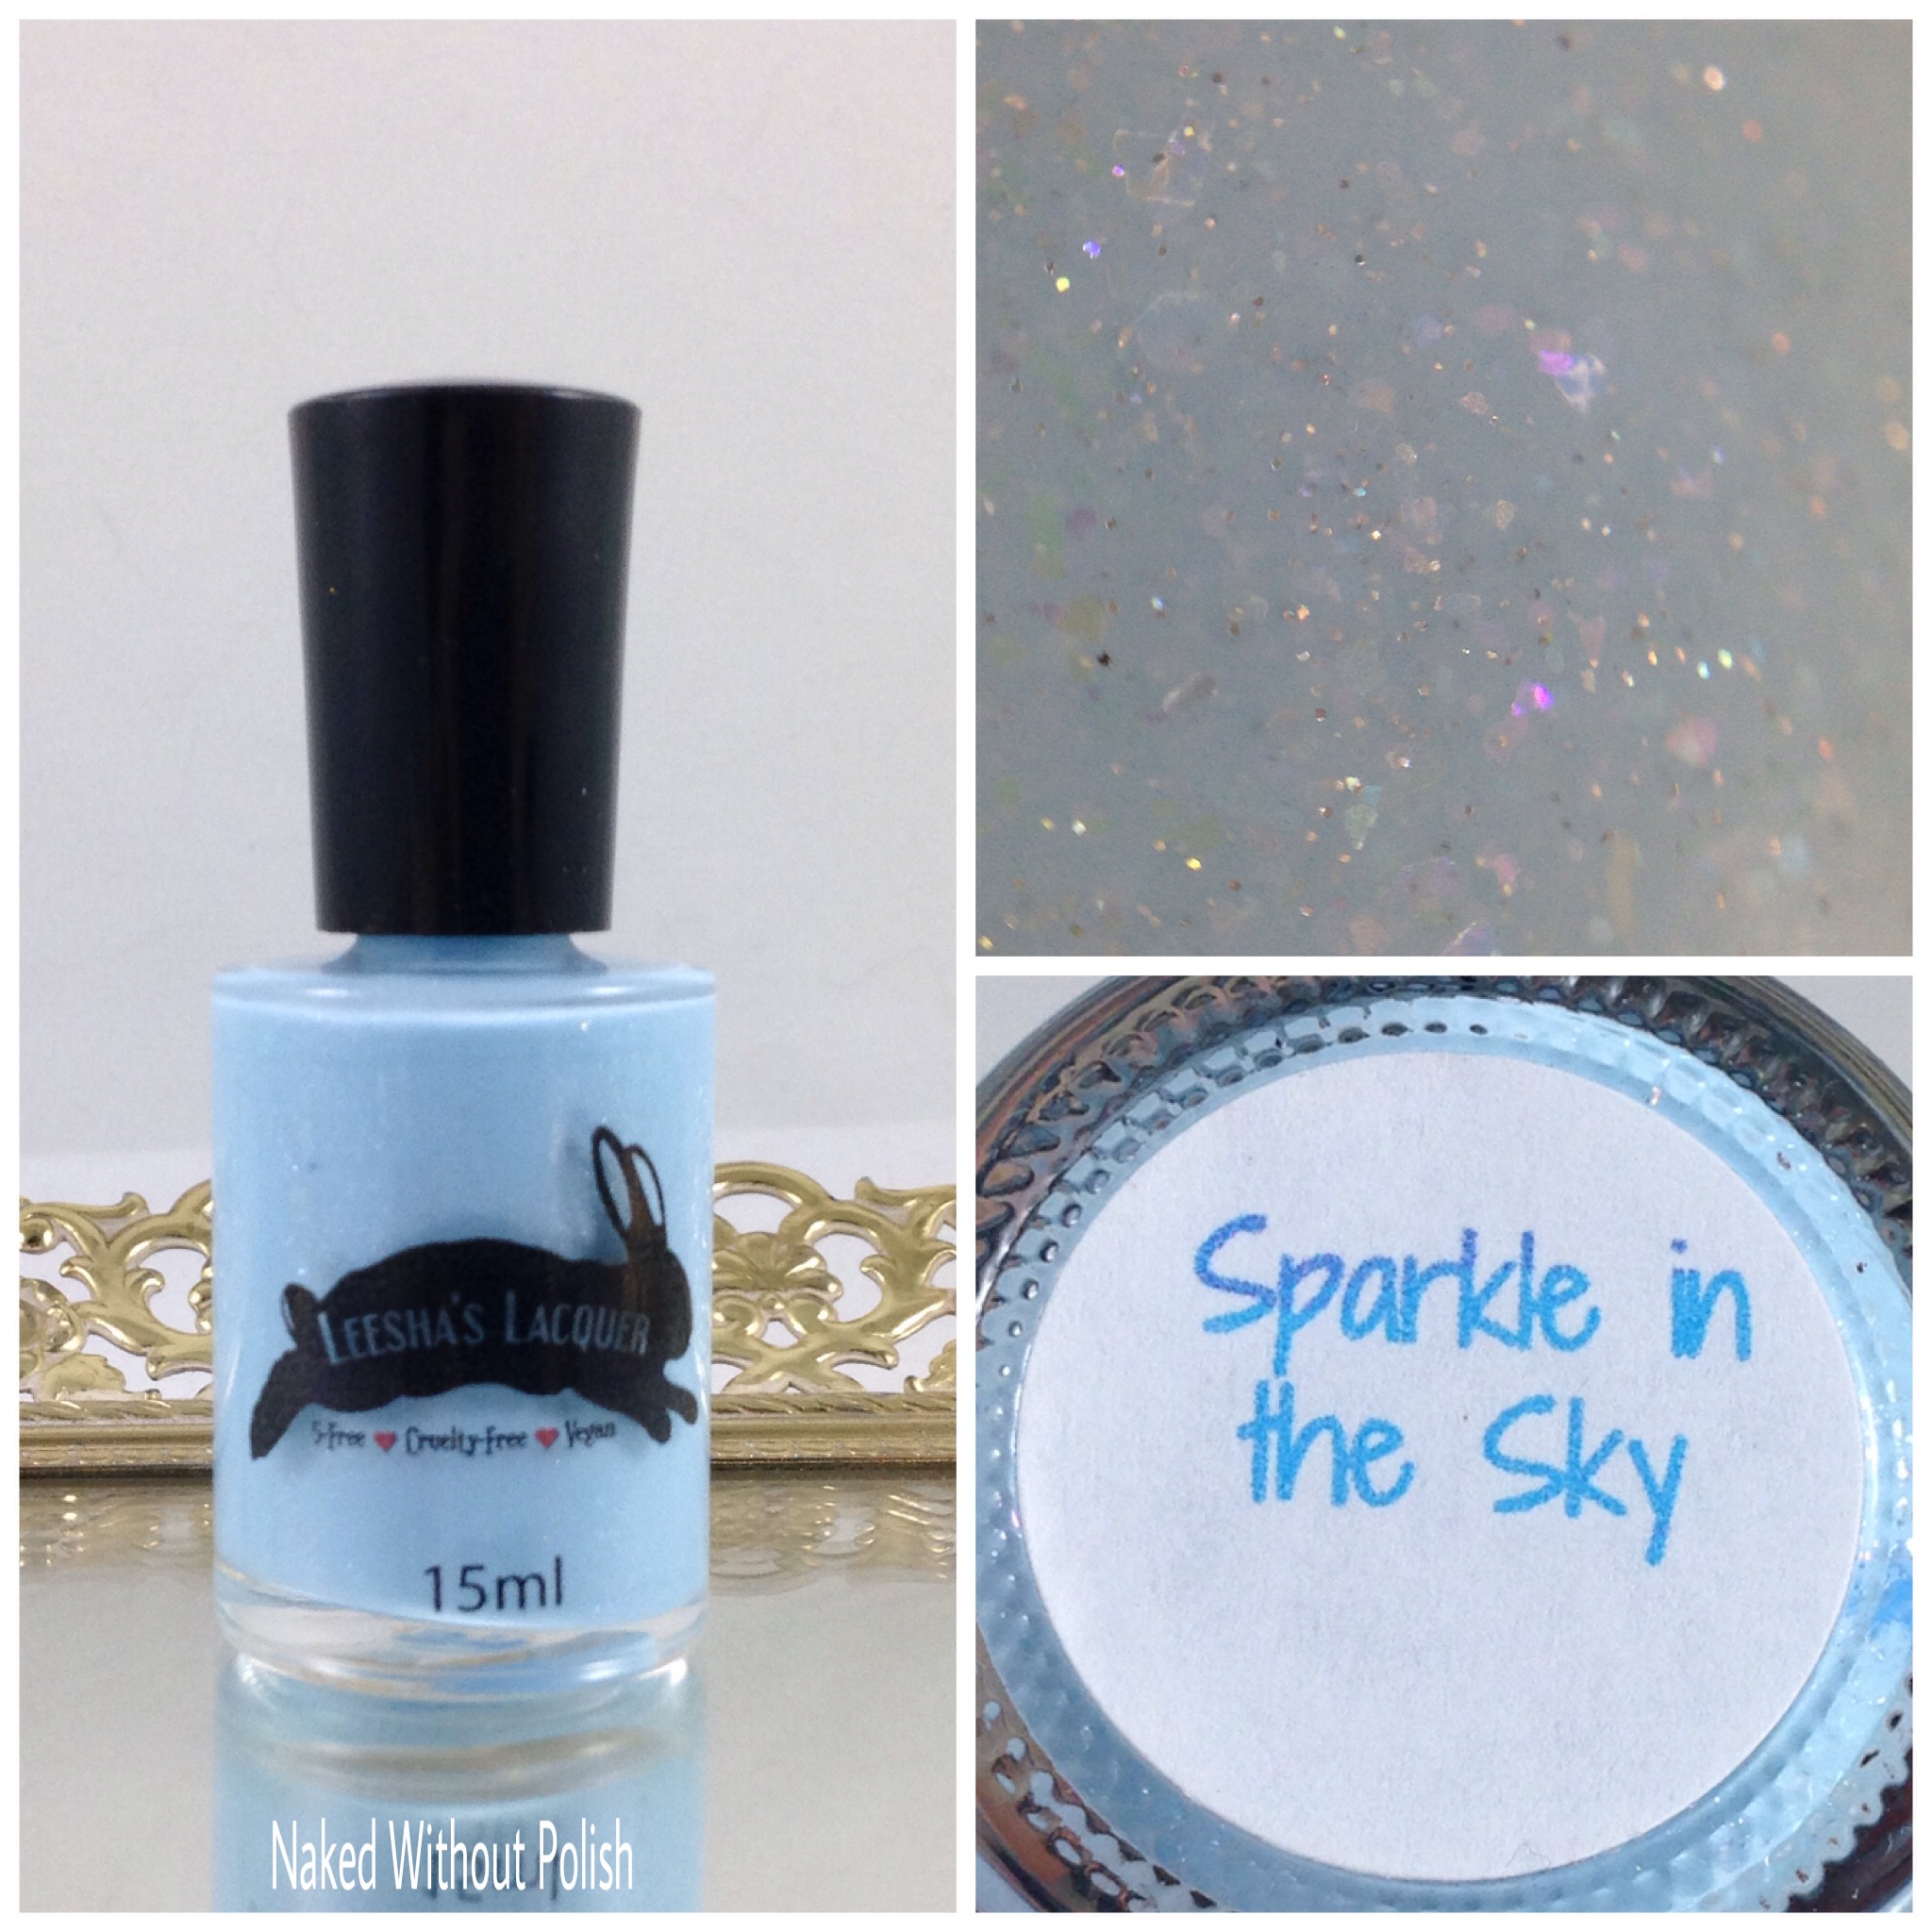 Leeshas-Lacquer-Sparkle-in-the-Sky-1